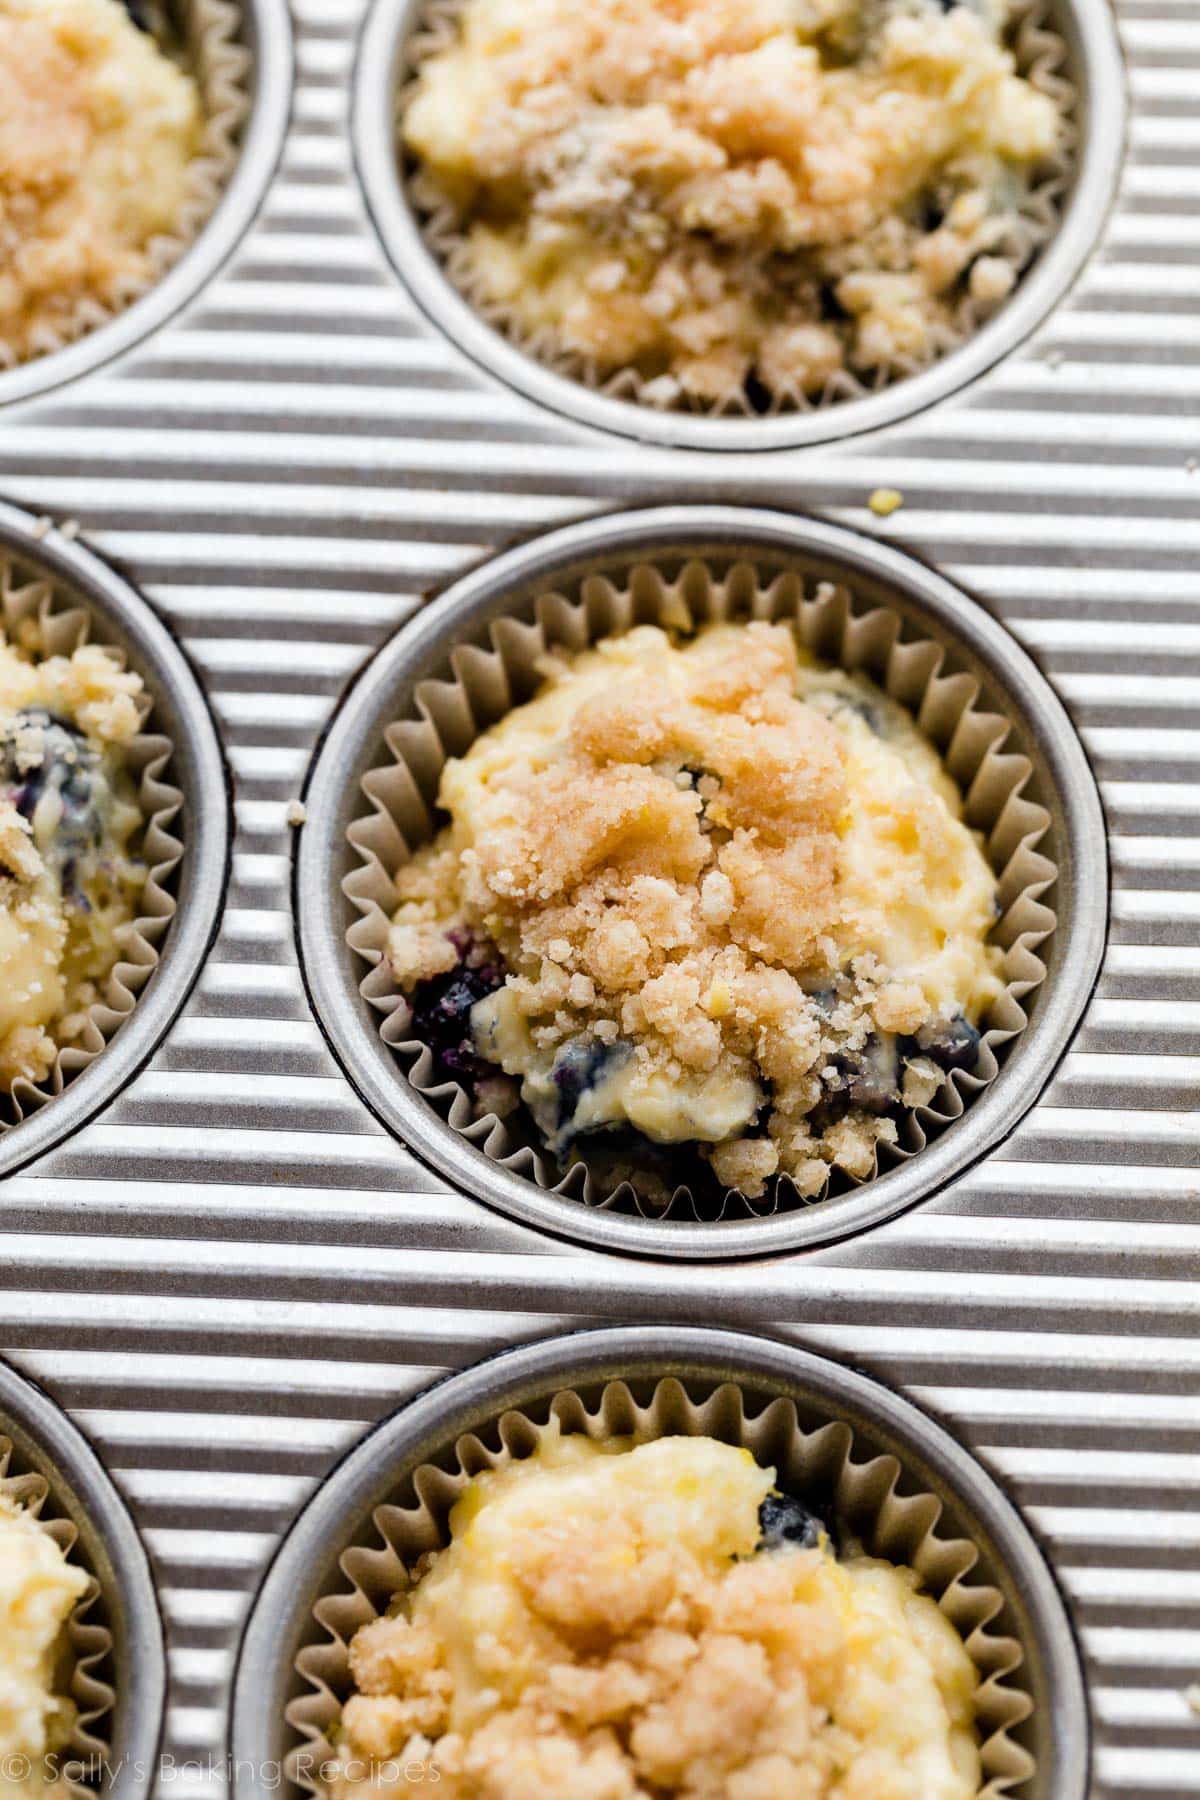 muffin batter with a crumb topping on top before baking in a muffin pan.